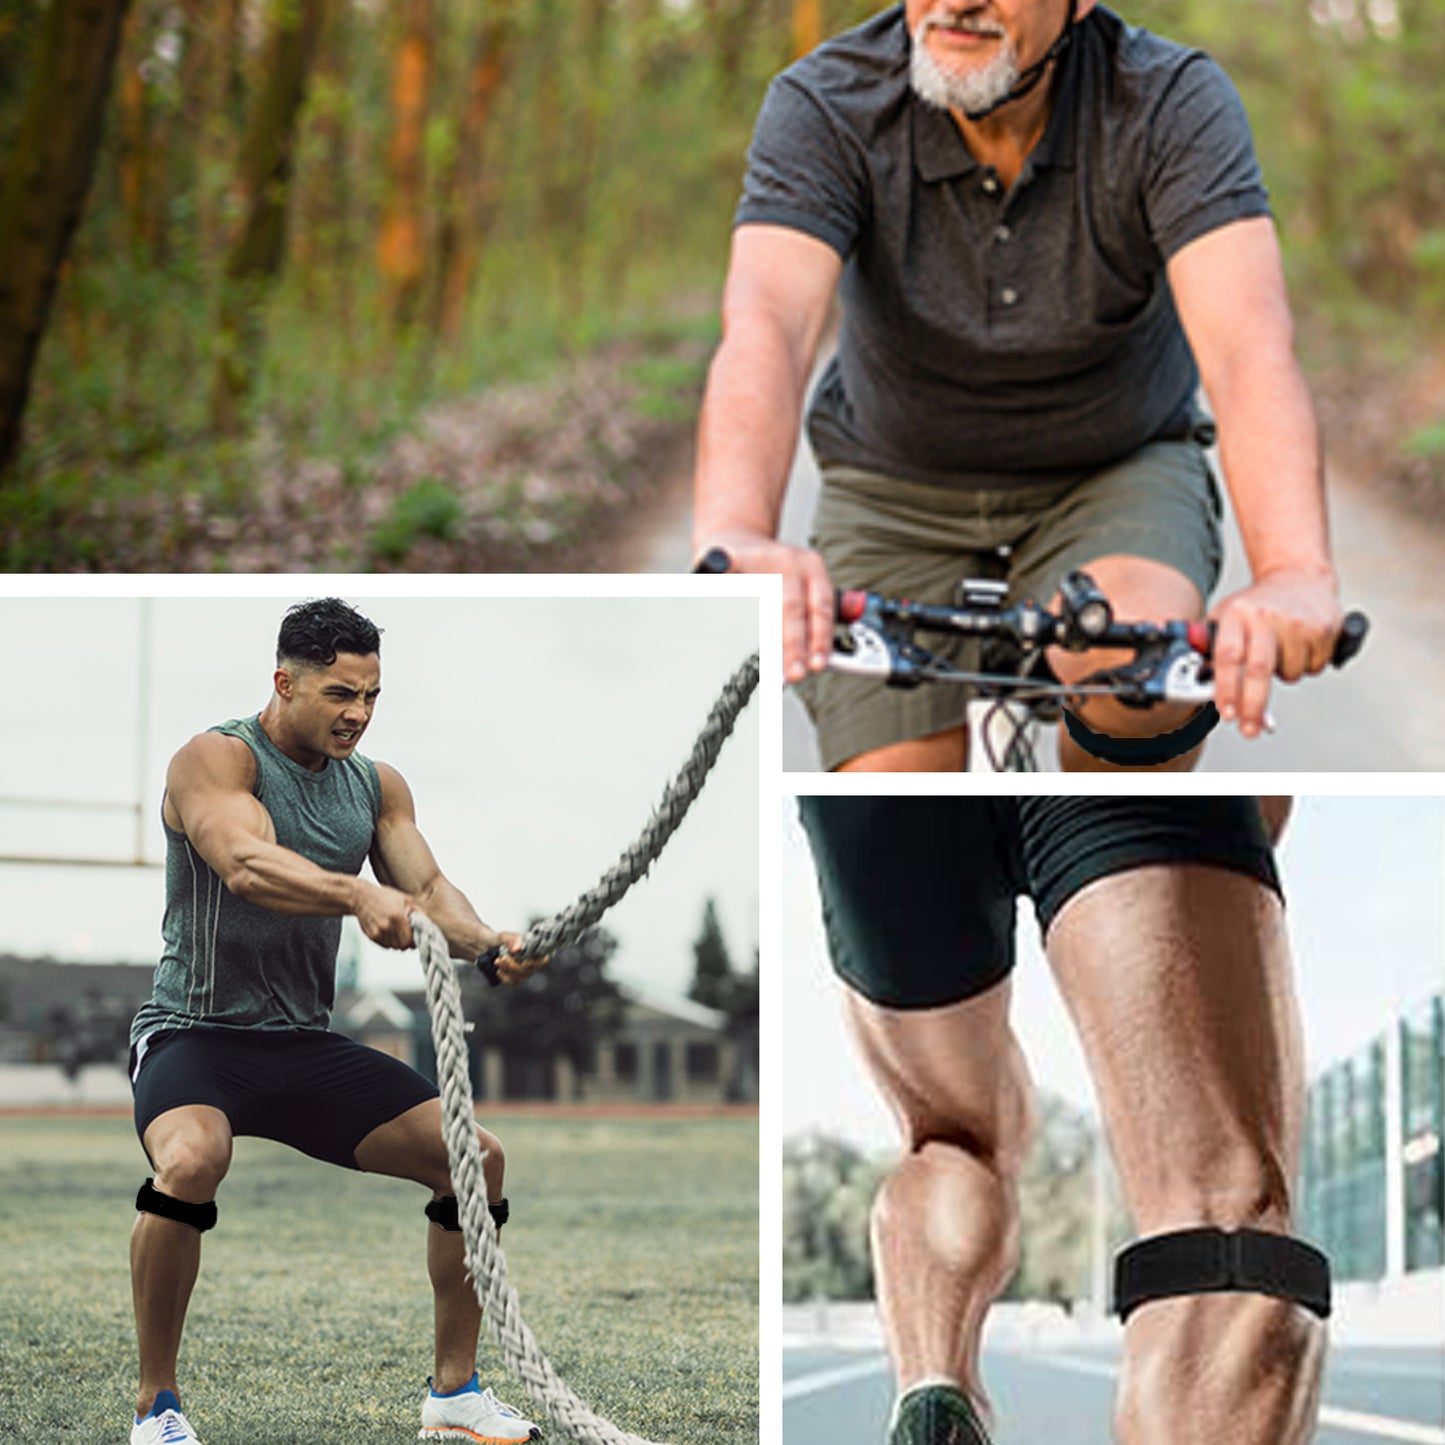 Uses of knee strap